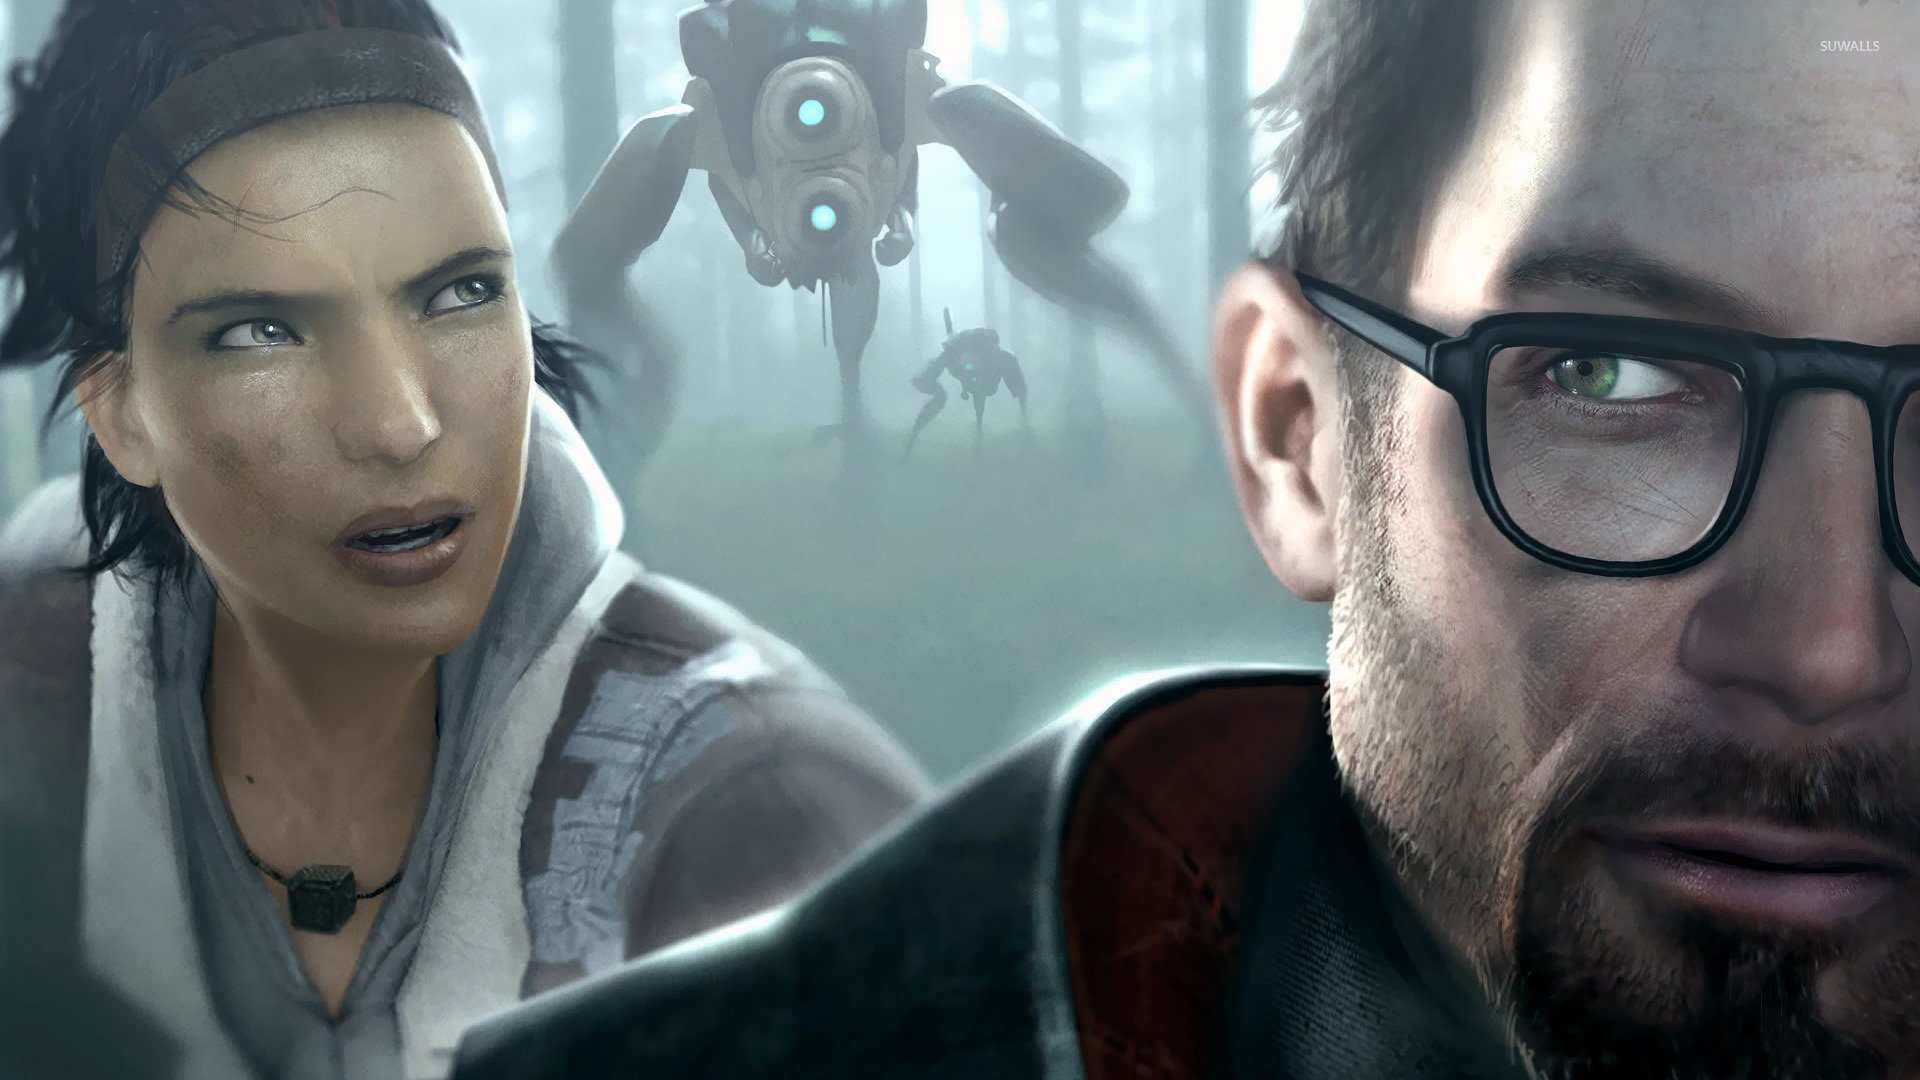 Half-Life: Alyx' VR Gameplay Videos Reveal Four Different Movement